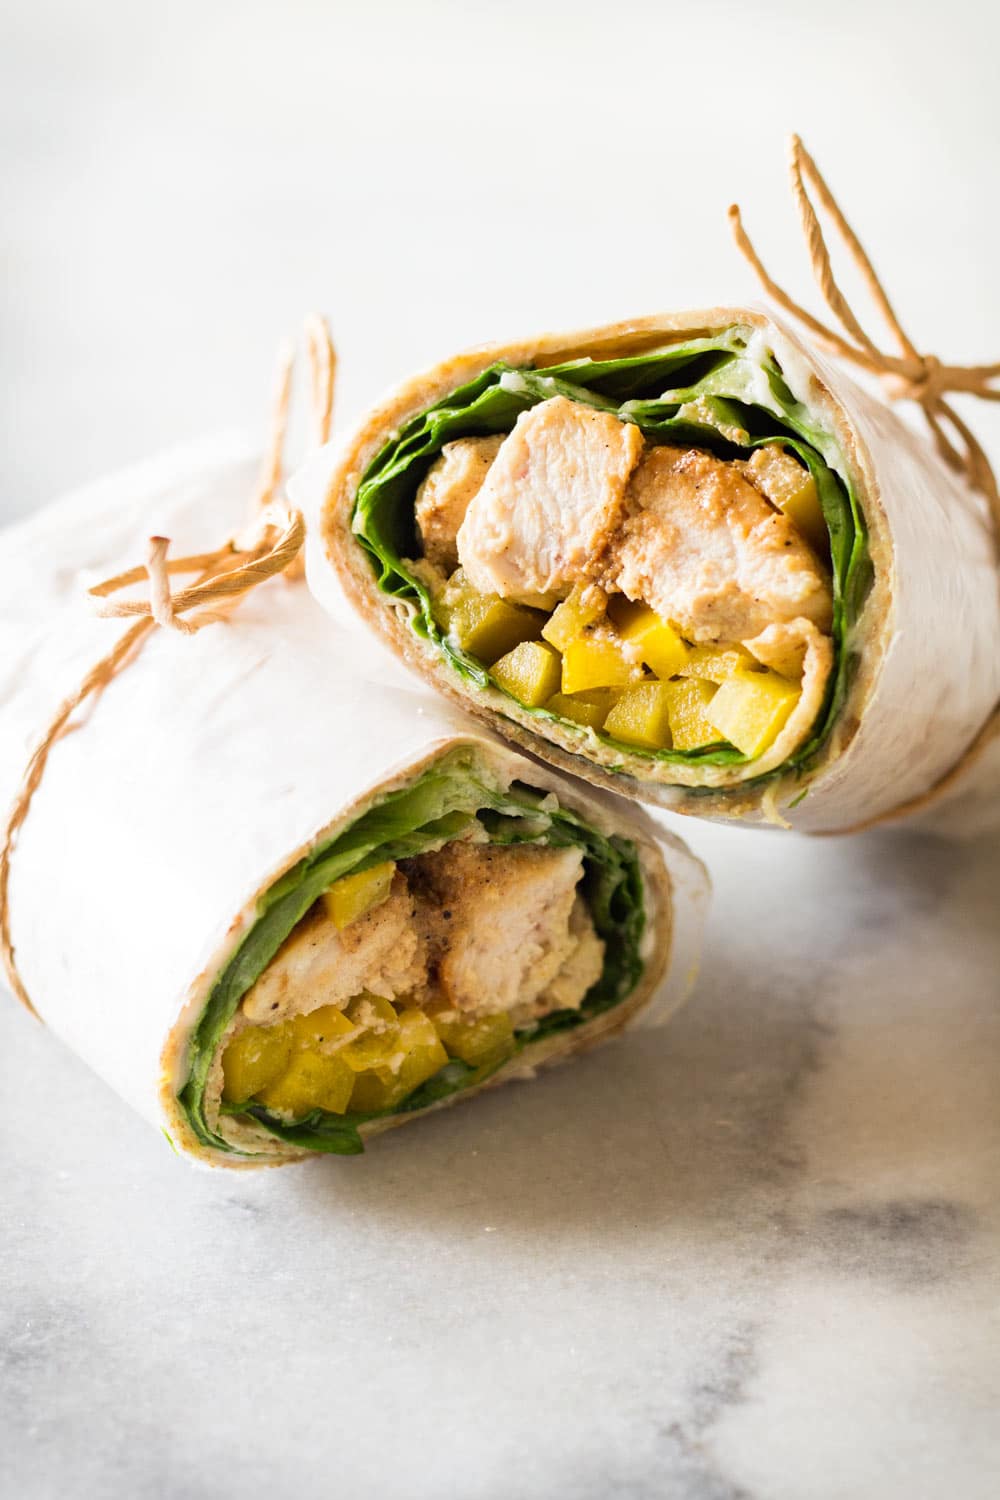 Healthy Chicken Wrap sliced in two, tied with jute twine.